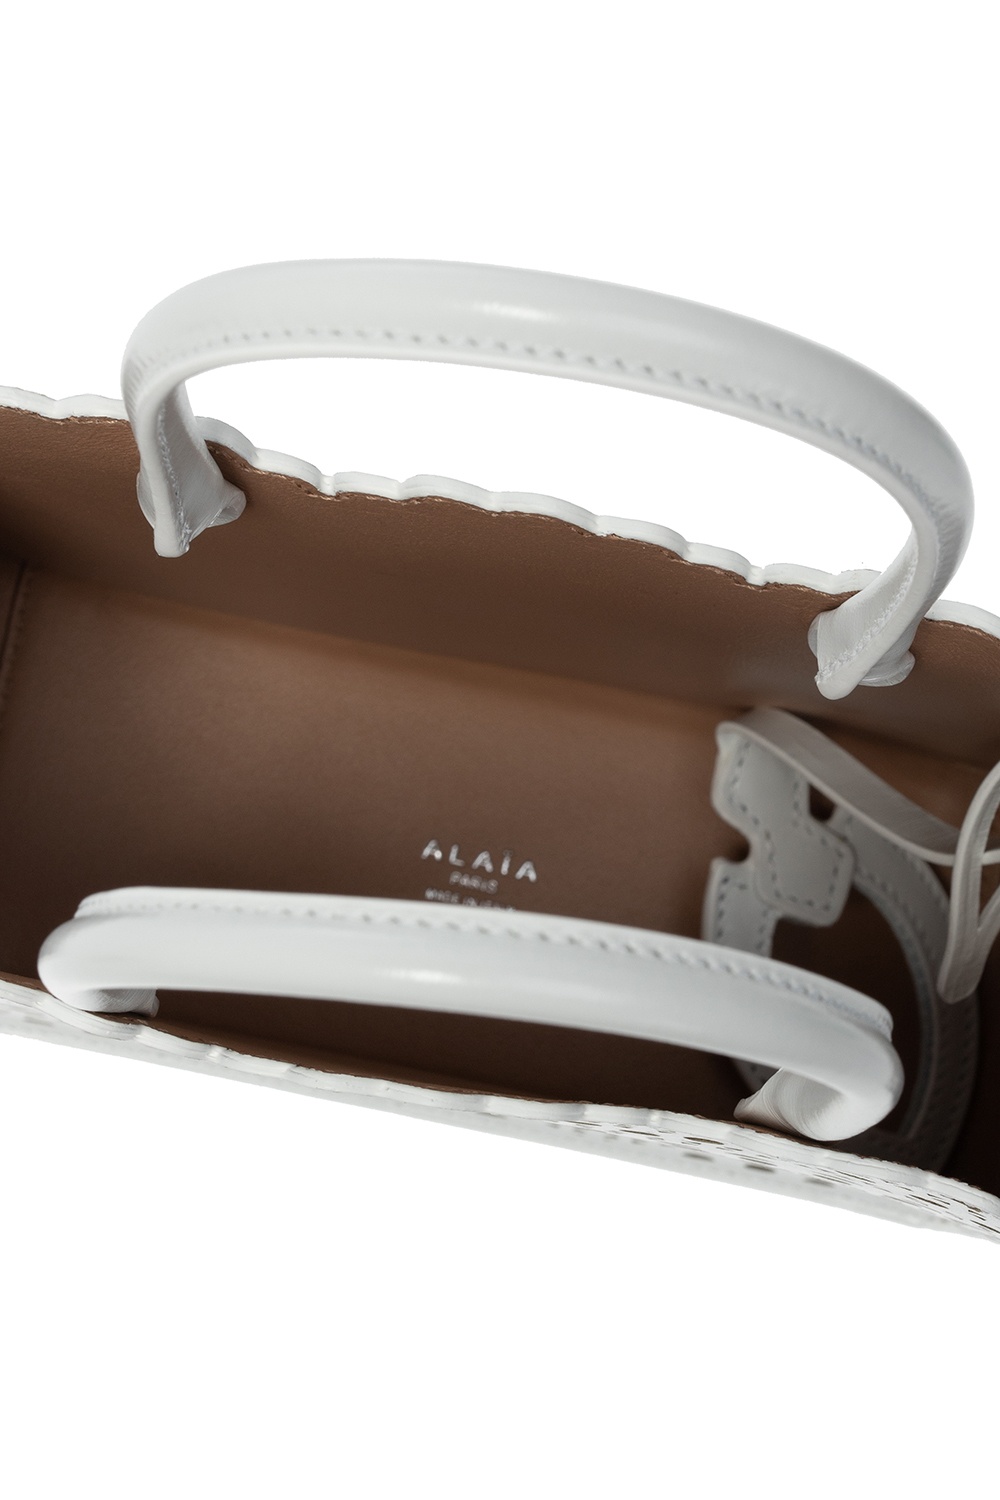 Garance Leather Phone Pouch in Silver - Alaia